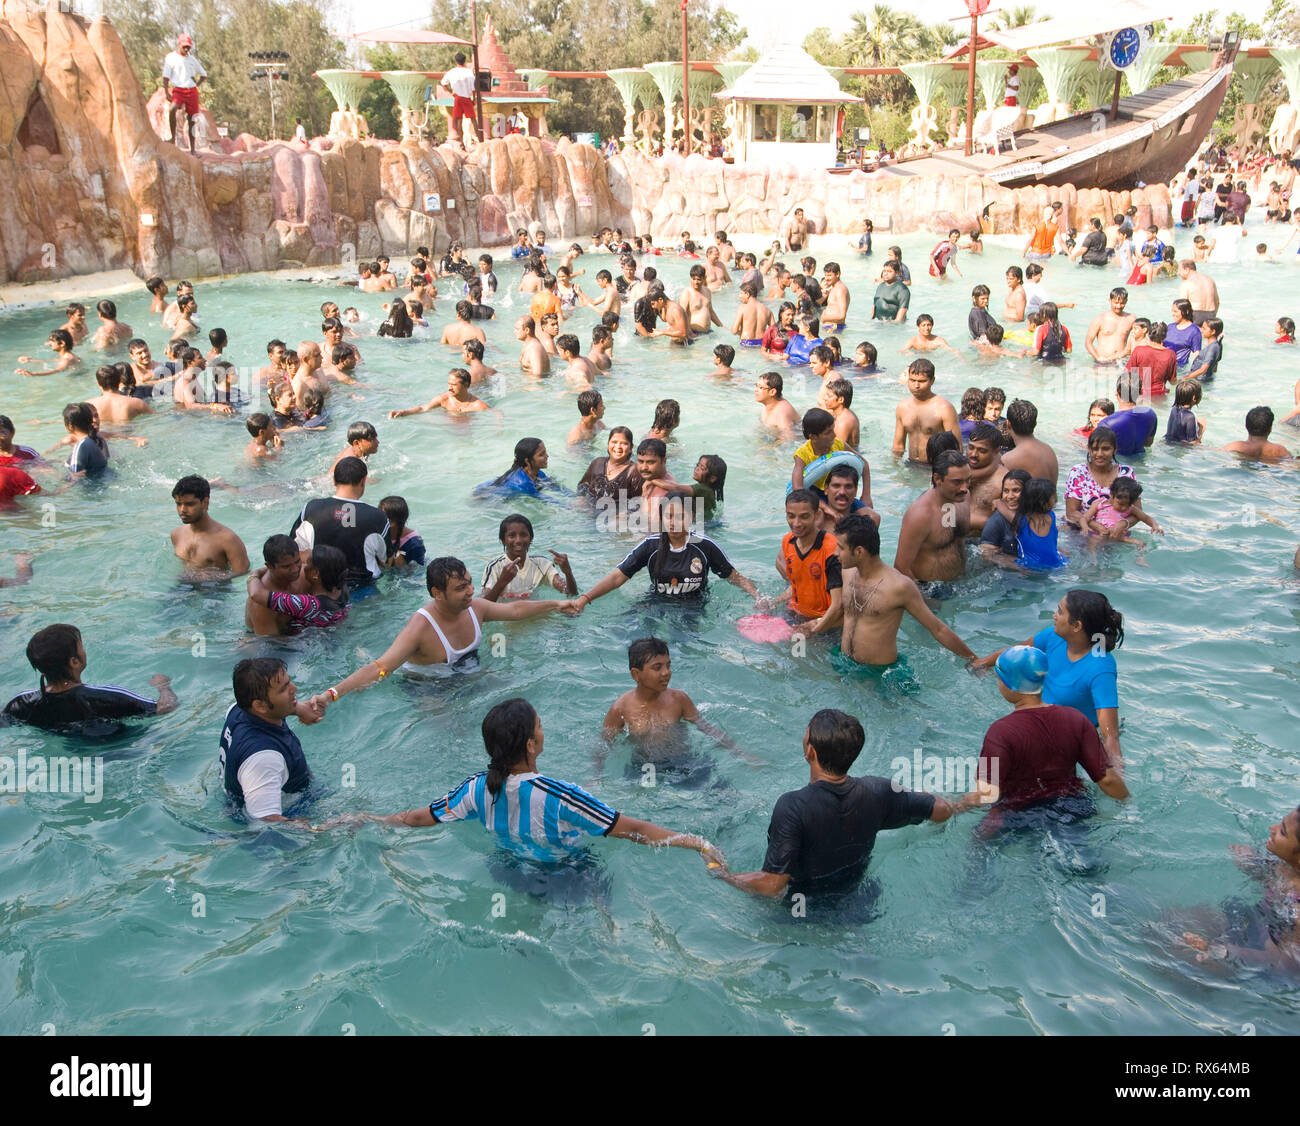 Though there may be water supply issues in the city Water Kingdom part of Essel world amusement park in Gorai, Mumbai, India is undiminished and attracted large crowds over the long weekend.     Water Kingdom is said to be Asia's largest theme water park and has several attractions including the world's biggest wave pool, heart stopping rides 'n' slides, river adventure cruises etc     Attractions of Water Kingdom:   The Wet Atlantic-The world's biggest wavepool   Misphisly Hill-12 hi-speed thrilling rides   Brat Zone-geysers, button-operated water games, jets for kids   Goofers Lagoon- The pe Stock Photo